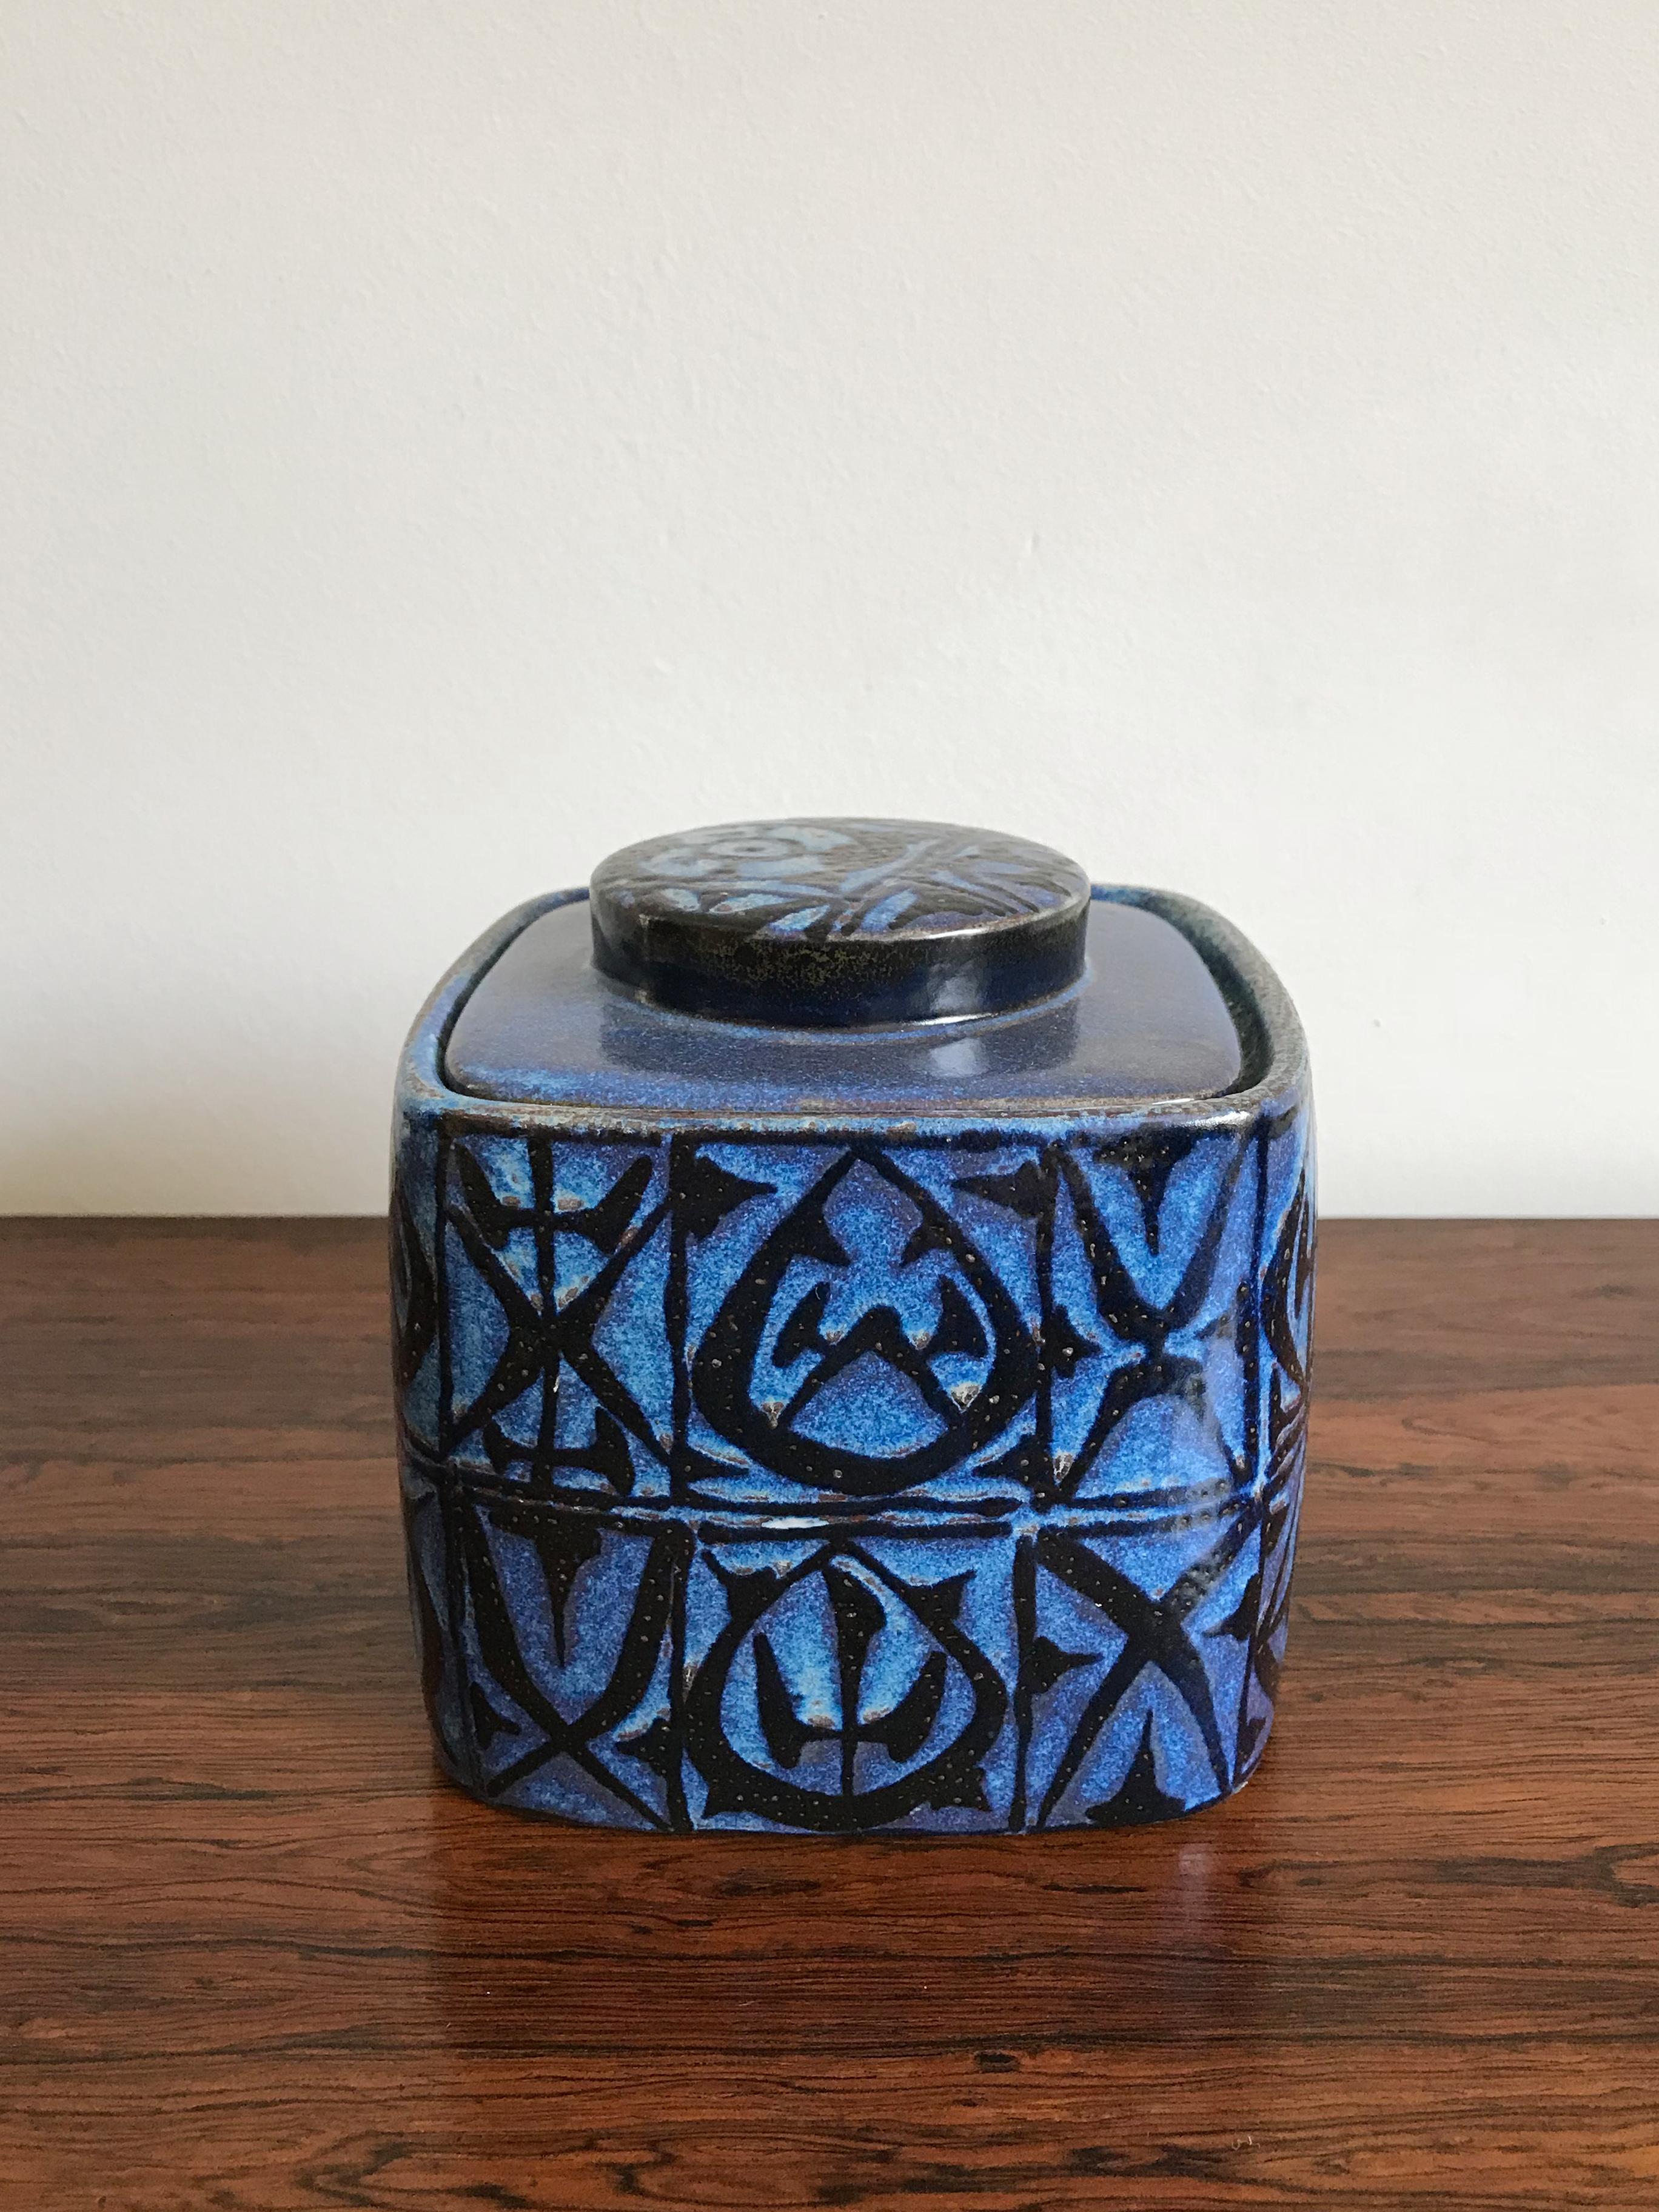 1960s Danish ceramic box or jewelry box designed by Danish artist Nils Thorsson for Royal Copenhagen with mark engraved on the bottom.